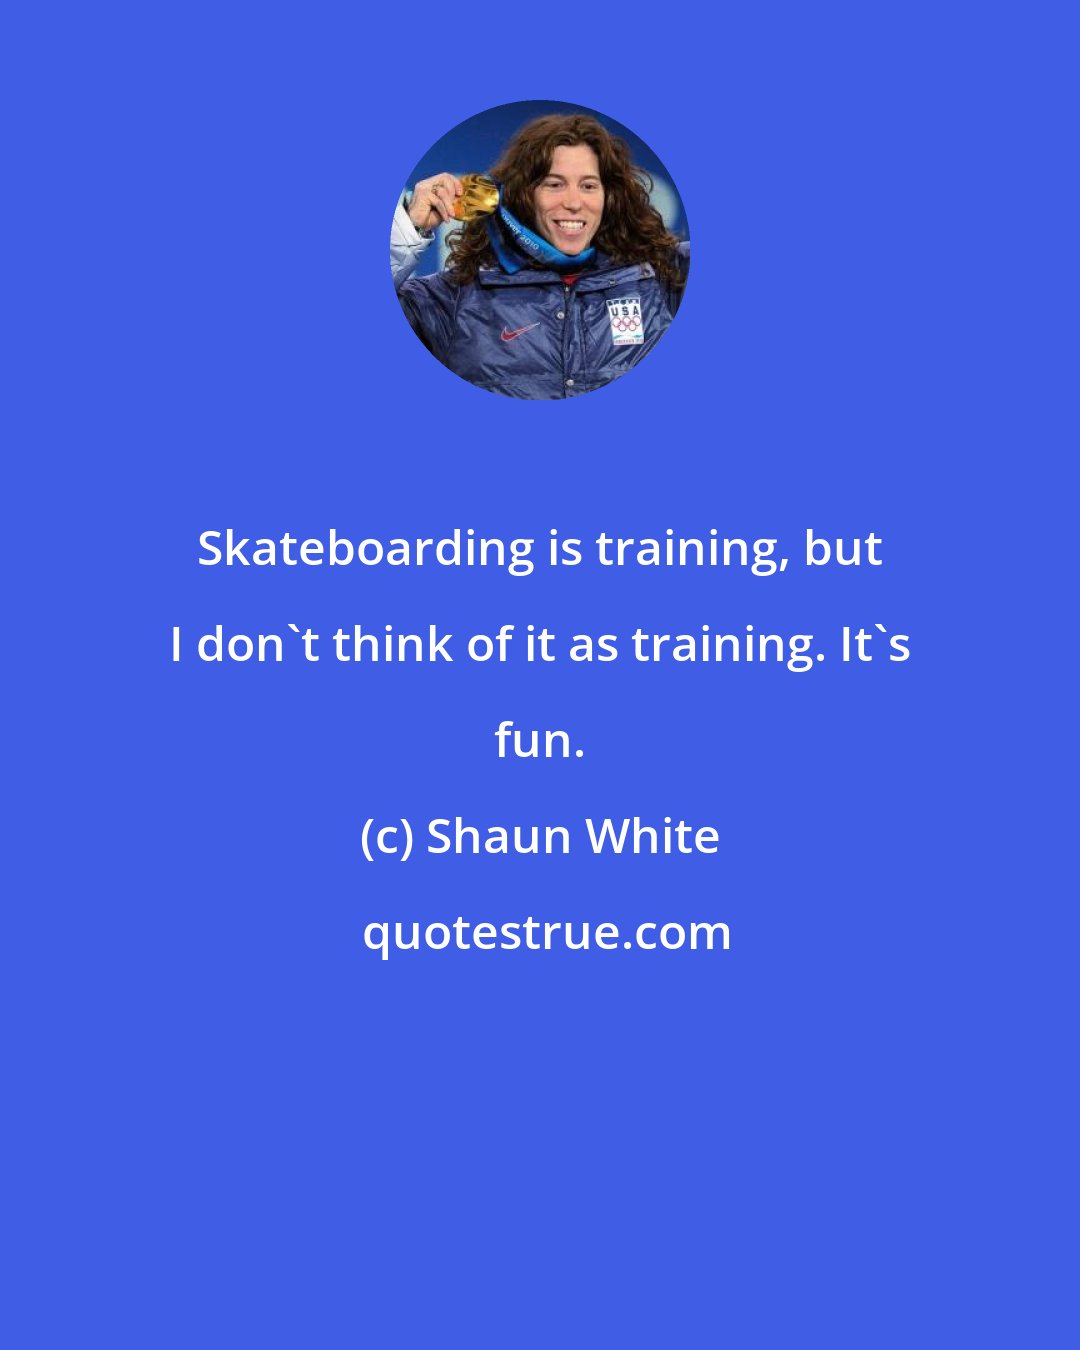 Shaun White: Skateboarding is training, but I don't think of it as training. It's fun.